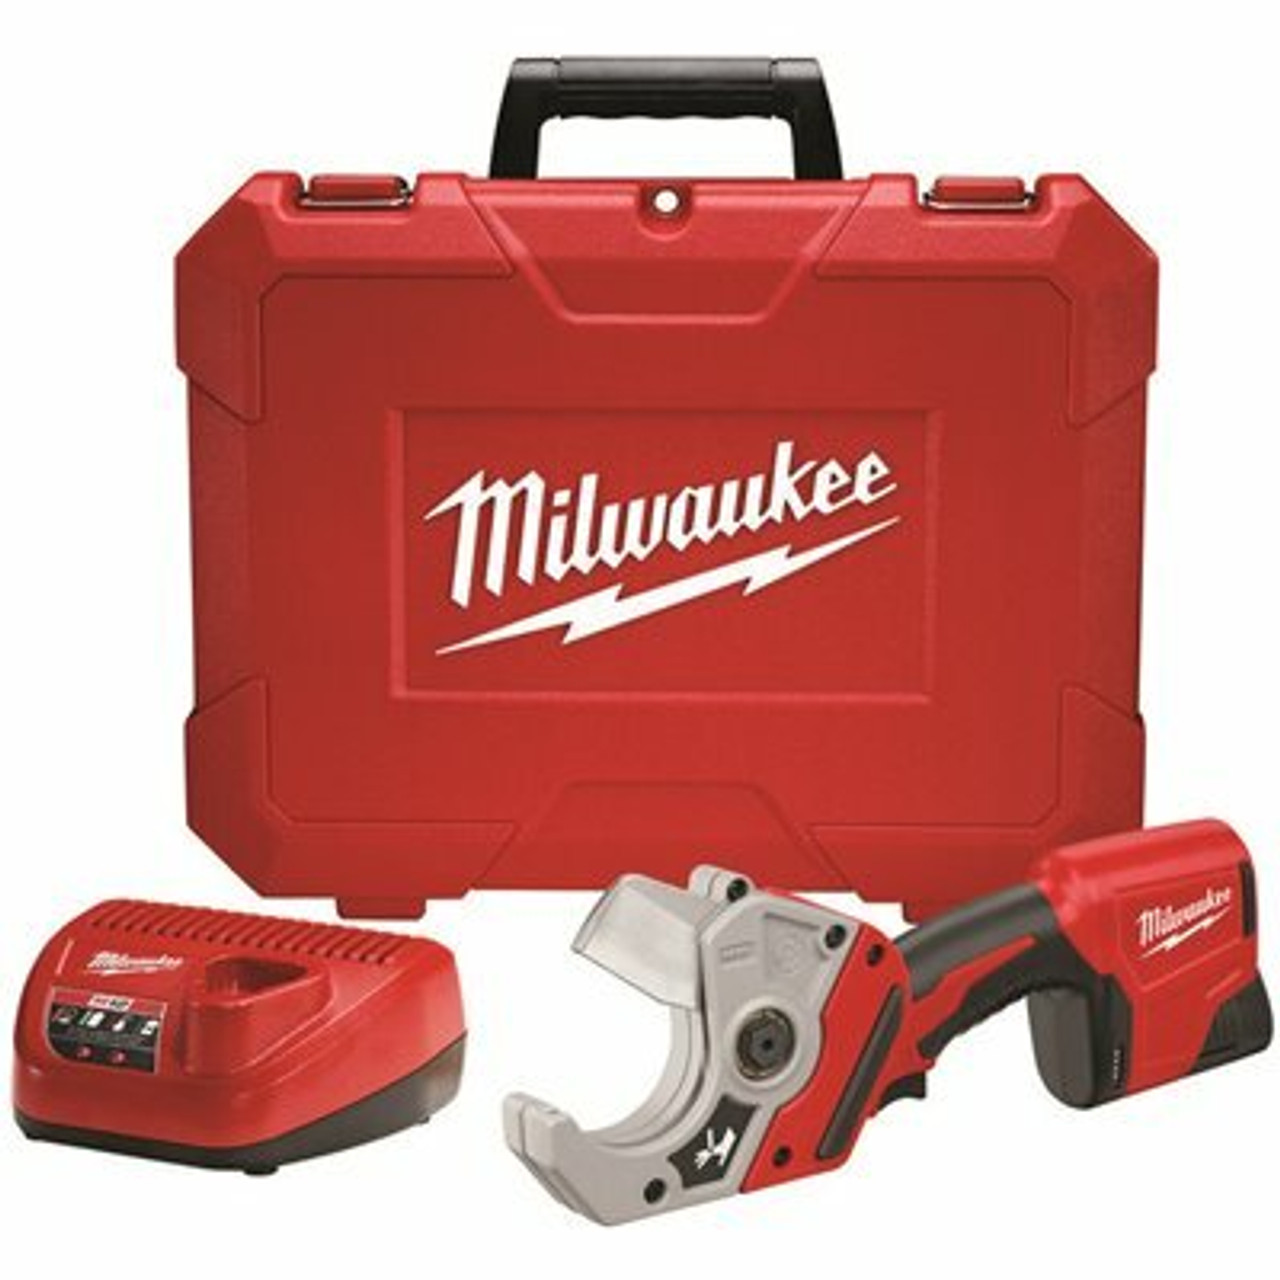 Milwaukee M12 12-Volt Lithium-Ion Cordless Pvc Shear Kit With One 1.5 Ah Battery, Charger And Hard Case